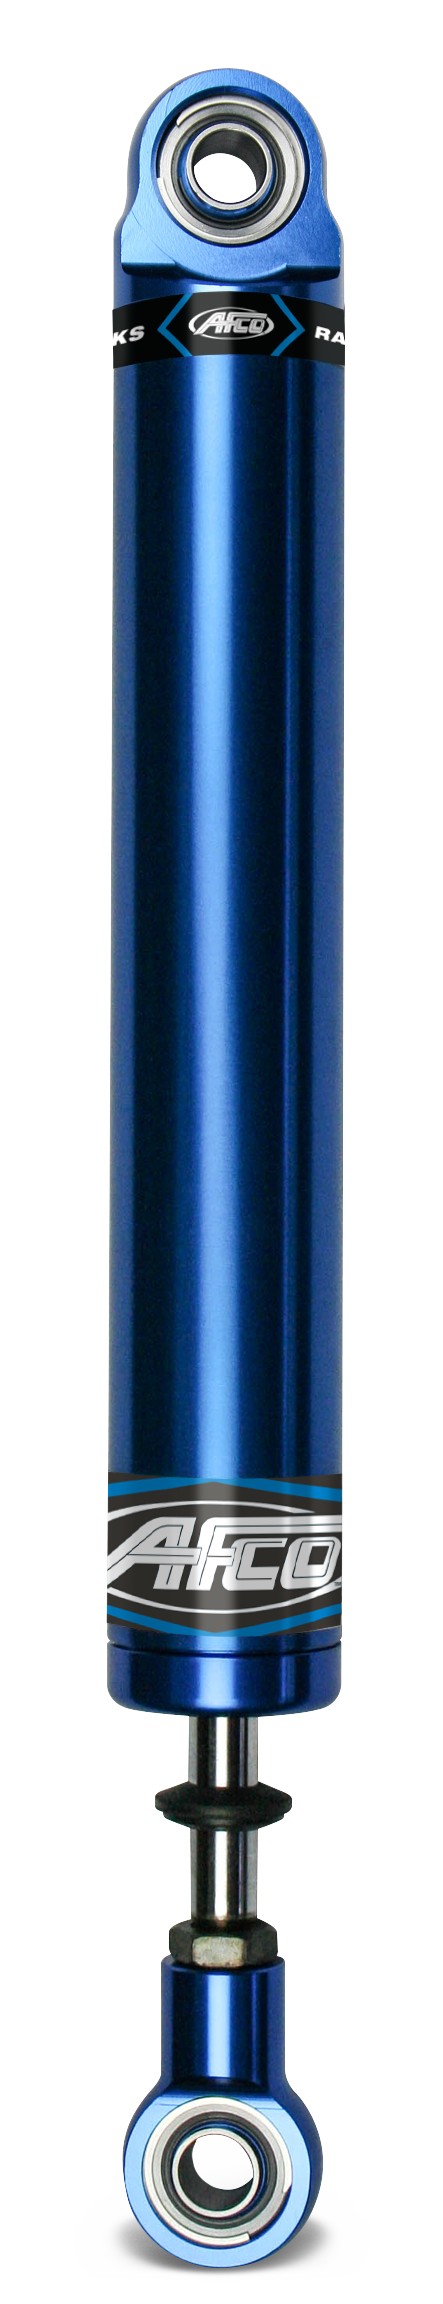 Aluminum Shock Twin Tube 16 Series Small Body 6 Inch Comp 5/Reb 5 Smooth  